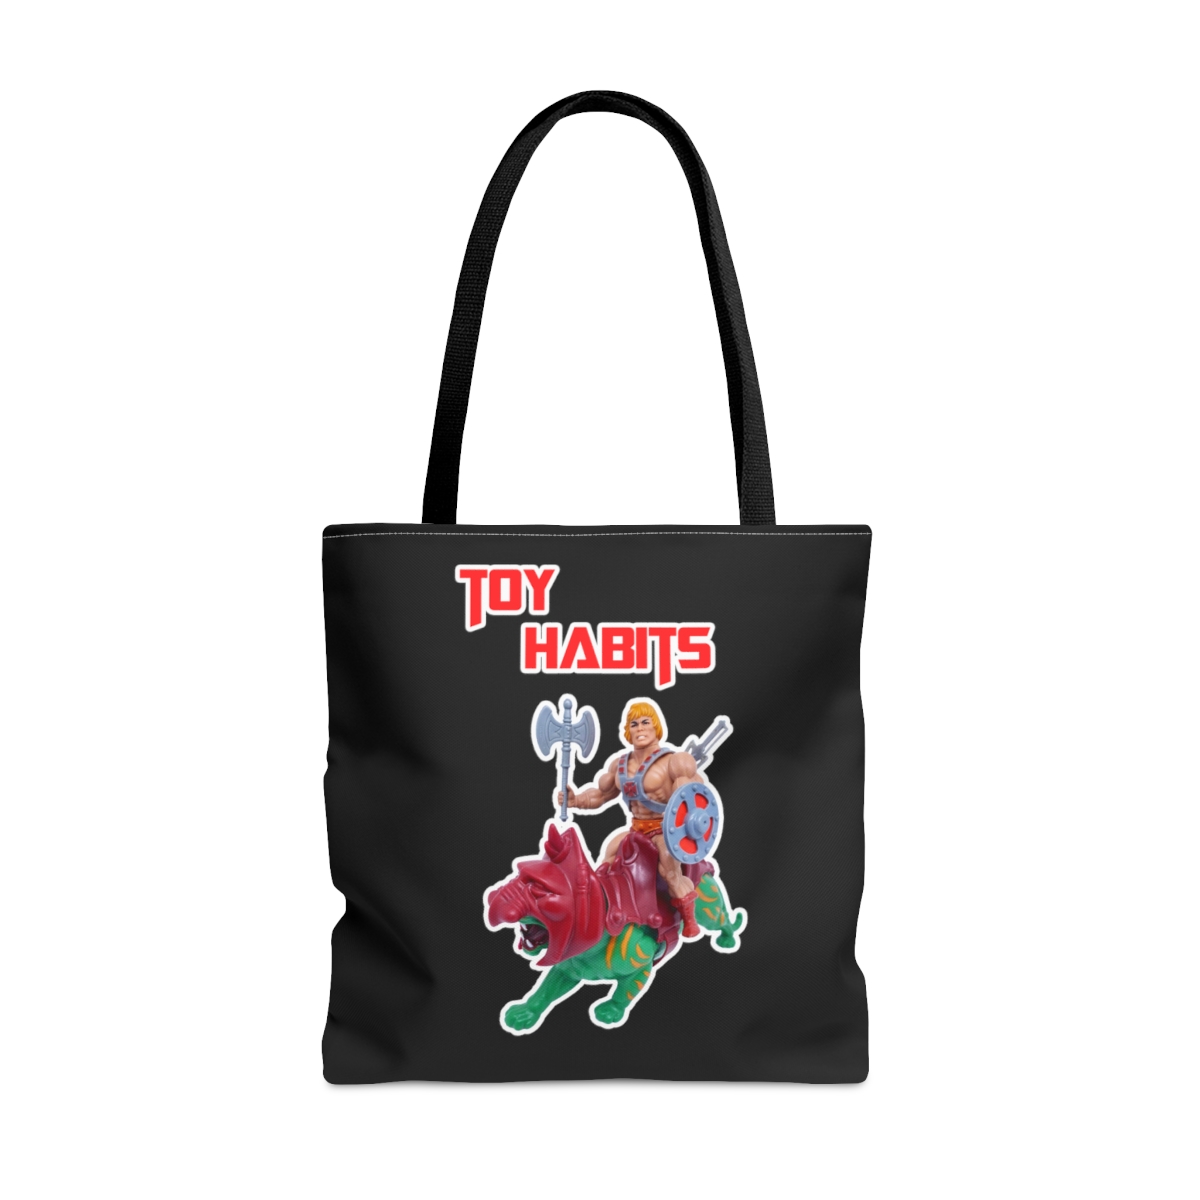 He-Man and Battle Cat Tote Bag product main image